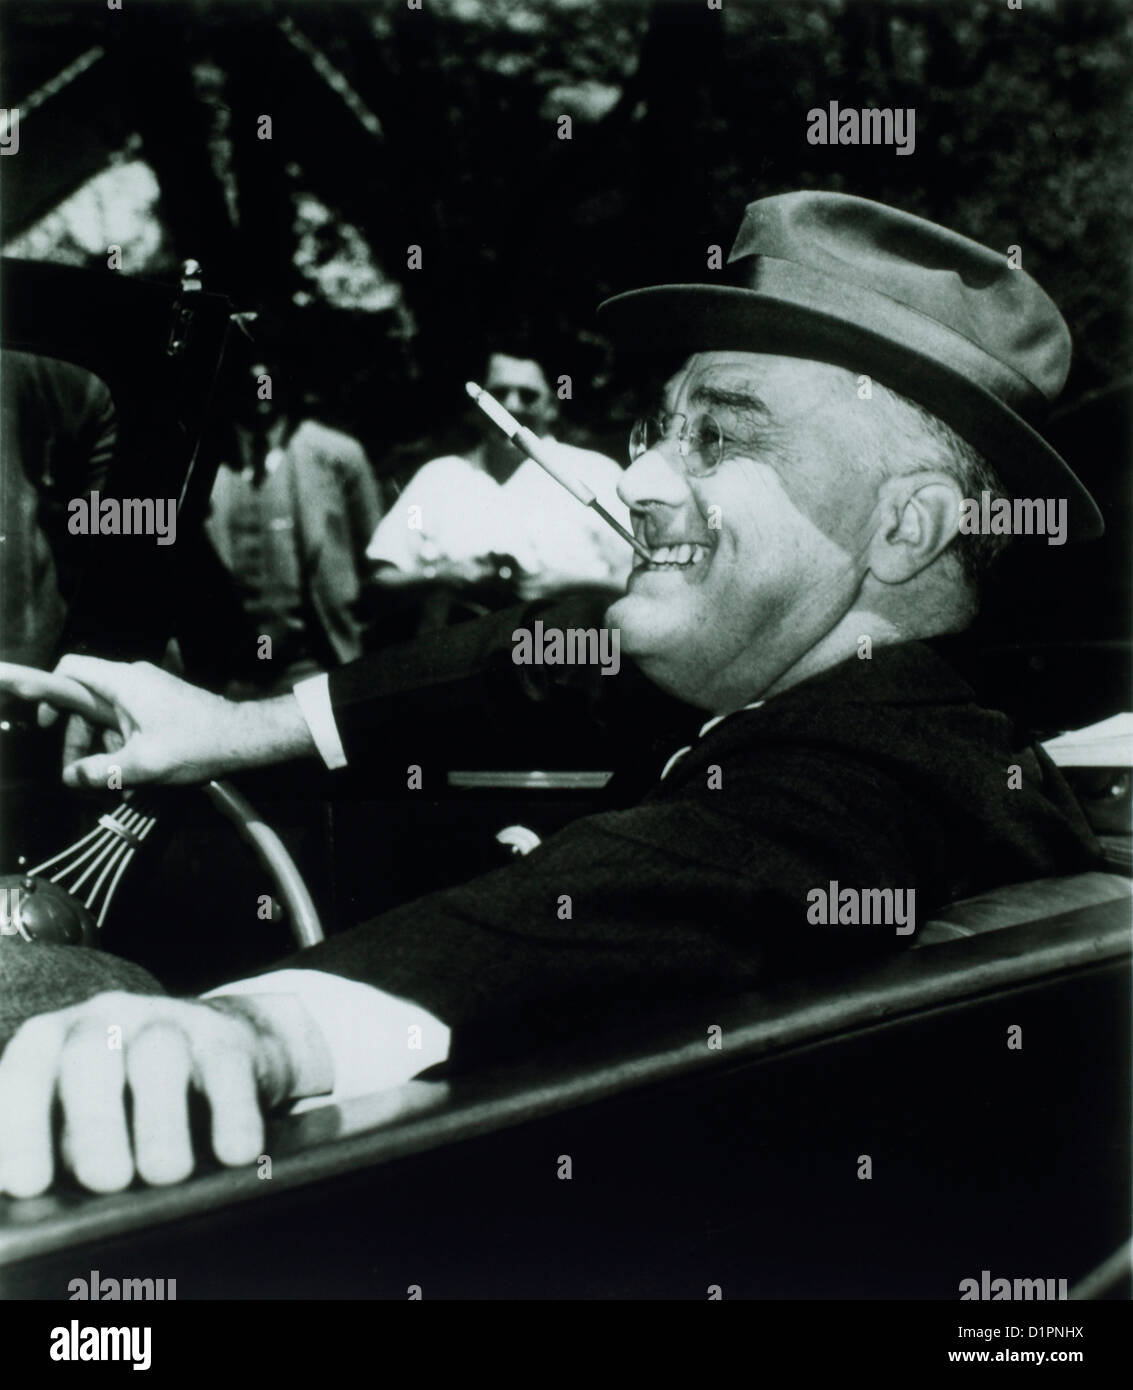 Franklin Roosevelt, 32nd President of the United States of America, Smoking Cigarette While Driving Automobile, 1939 Stock Photo